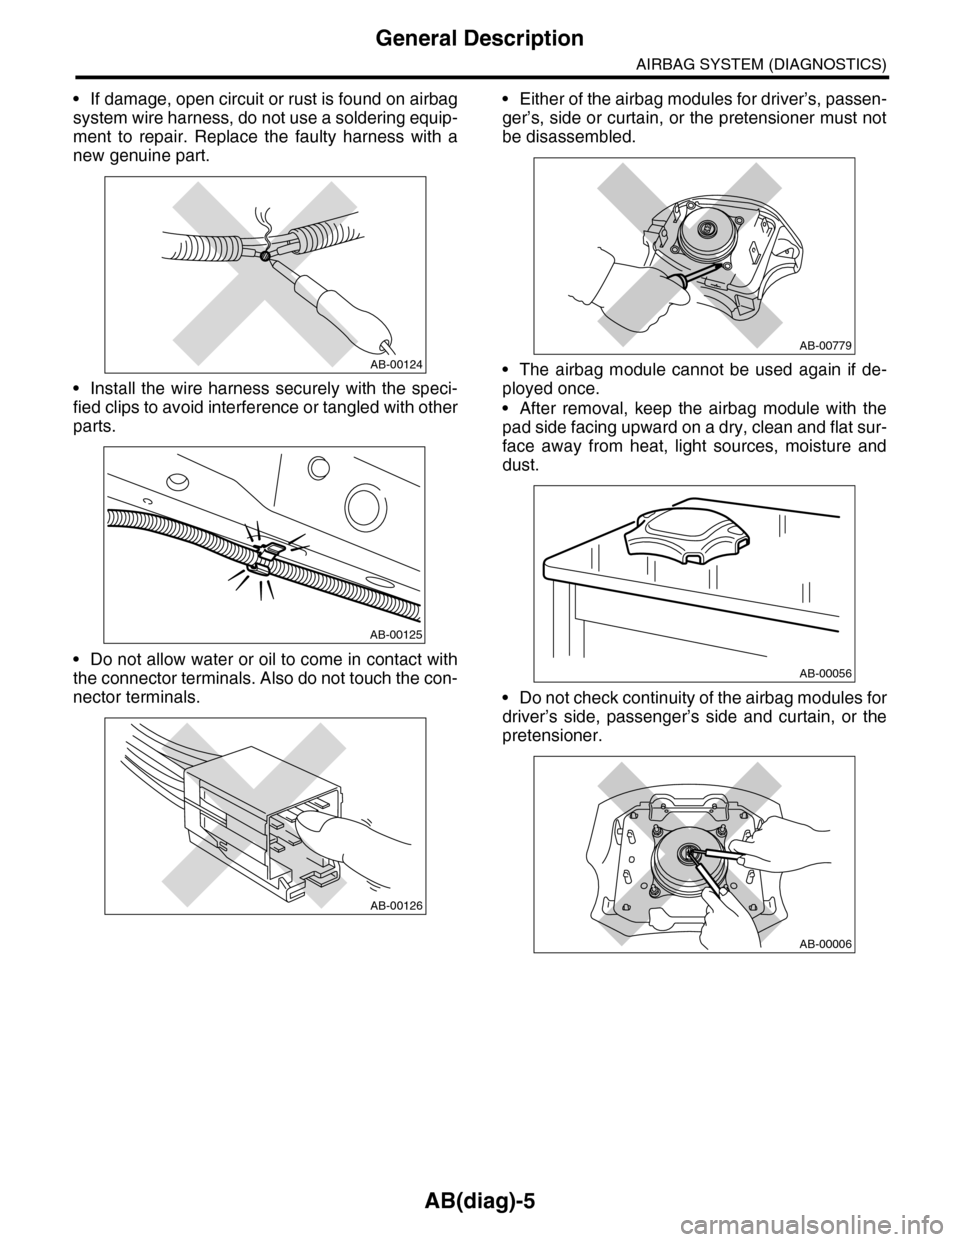 SUBARU TRIBECA 2009 1.G Service Workshop Manual AB(diag)-5
General Description
AIRBAG SYSTEM (DIAGNOSTICS)
•If damage, open circuit or rust is found on airbag
system wire harness, do not use a soldering equip-
ment  to  repair.  Replace  the  fau